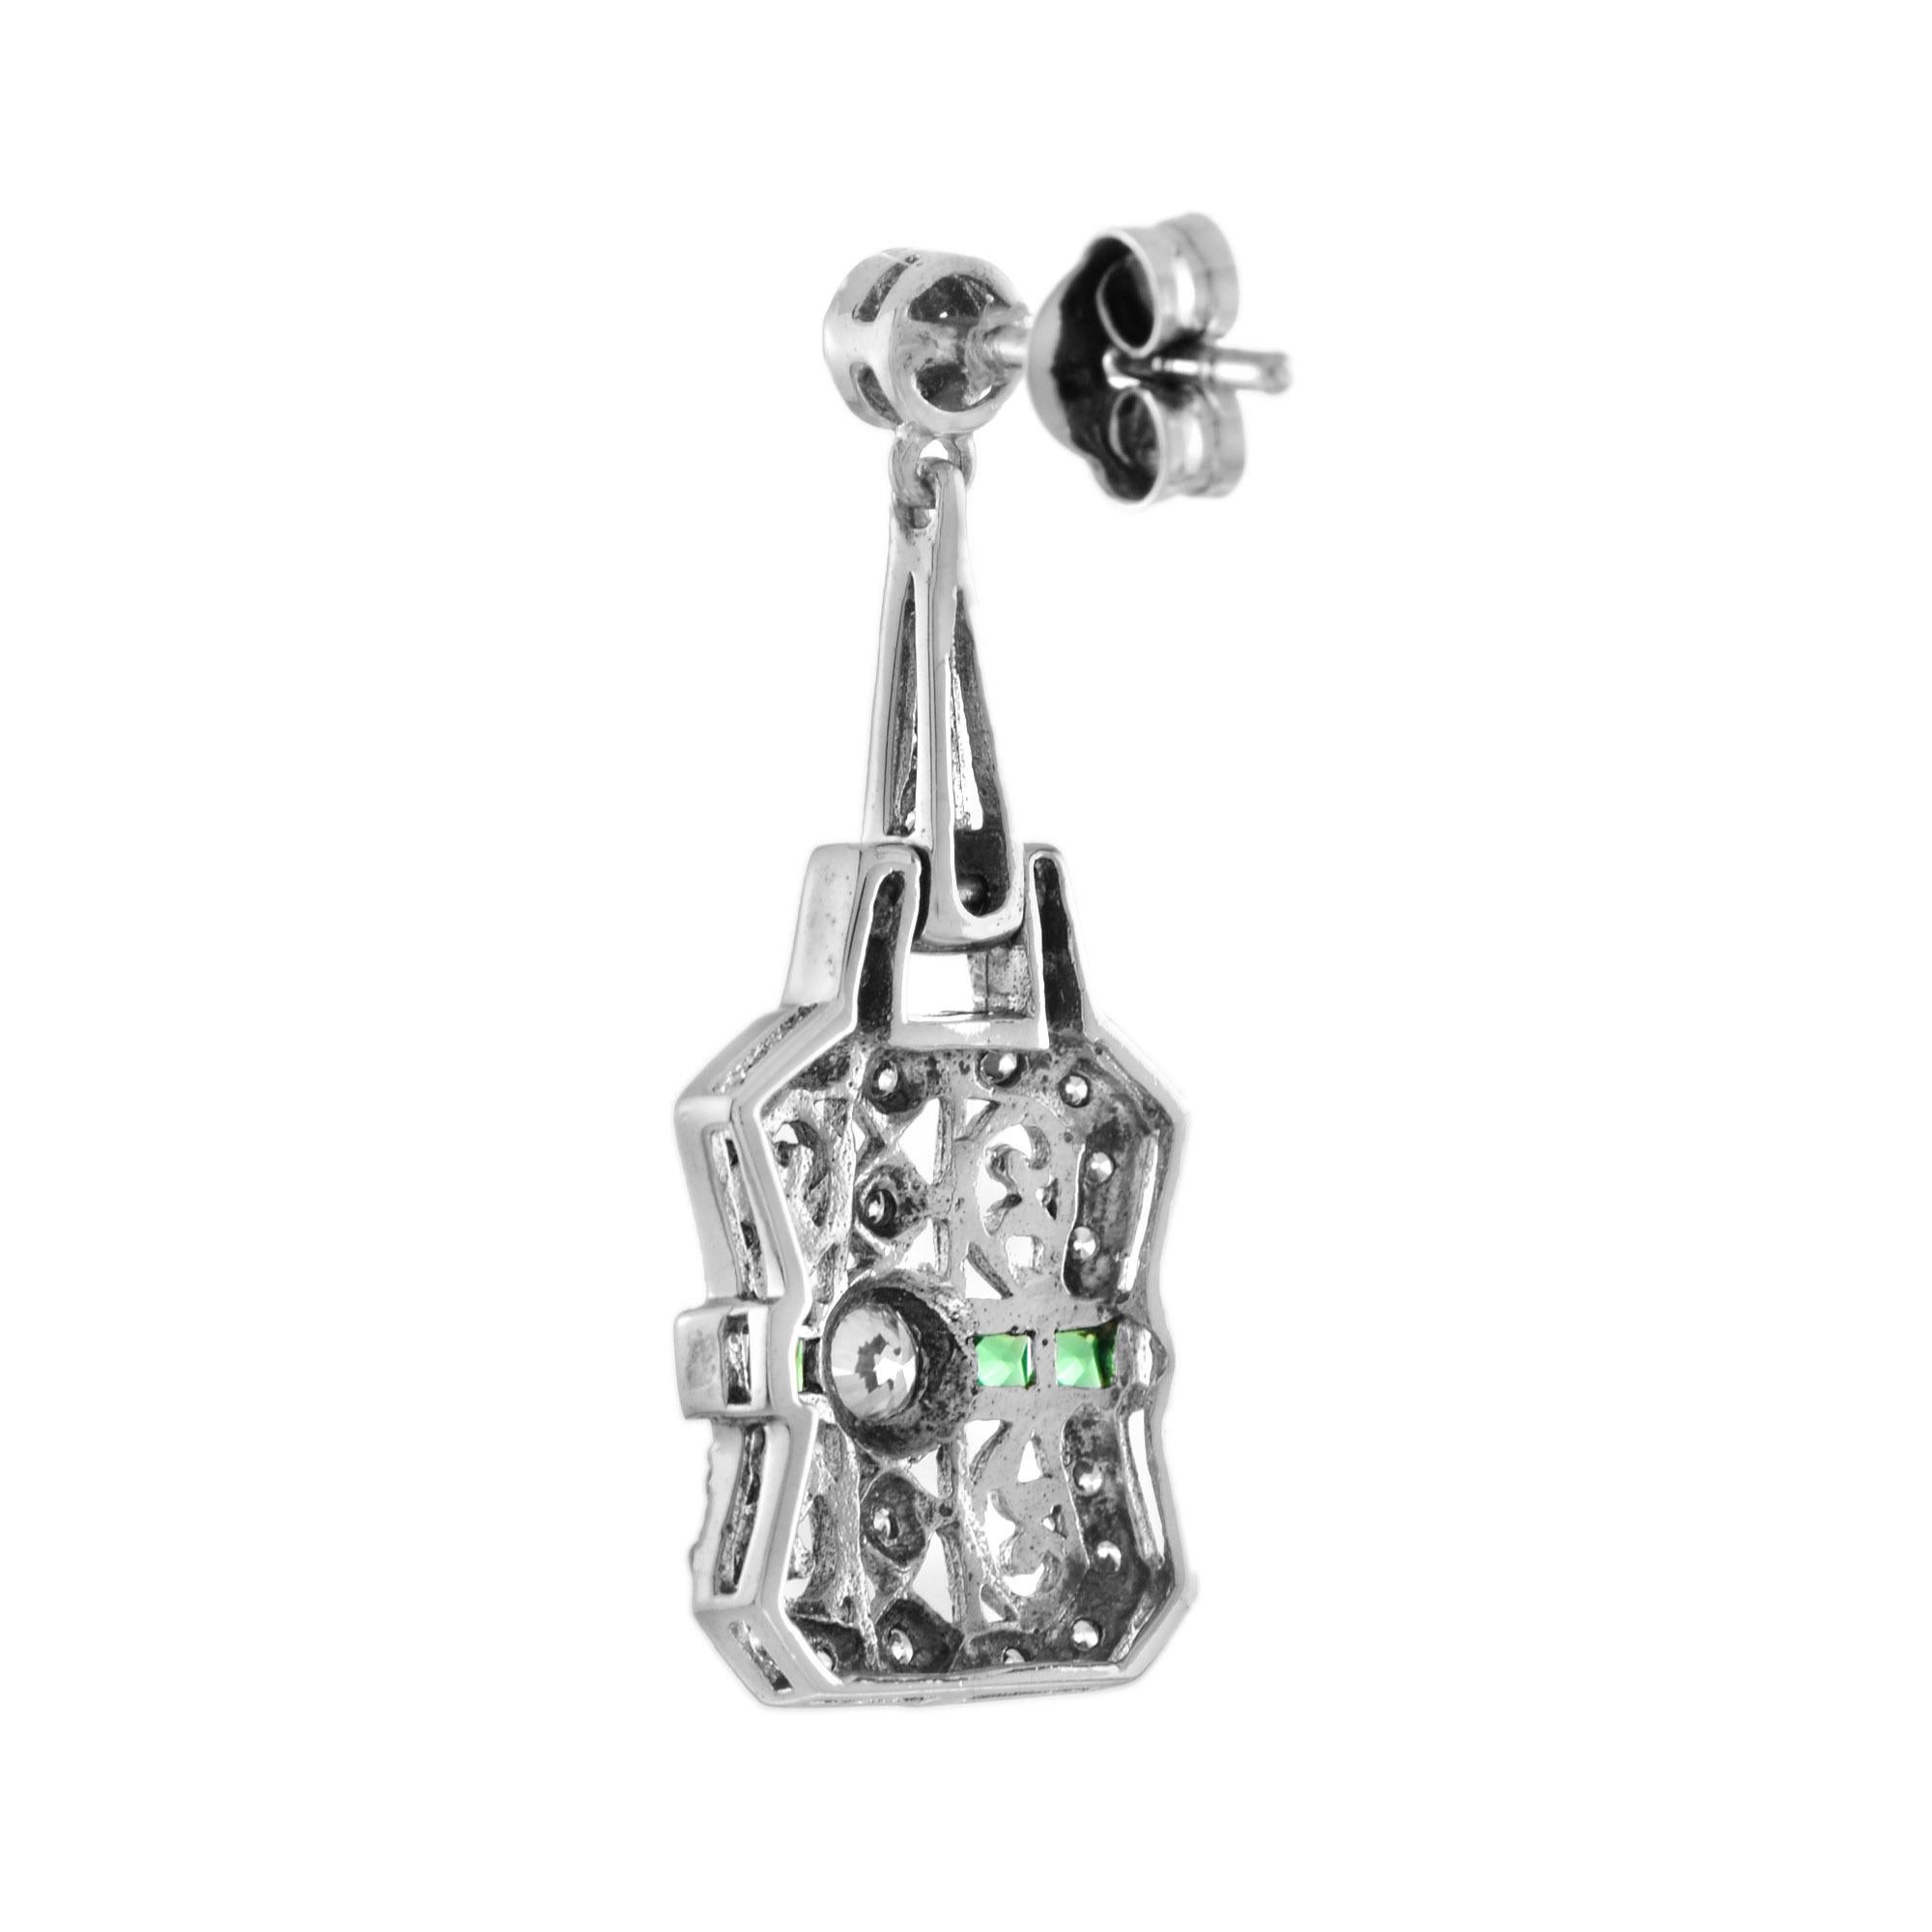 Round Cut Diamond and Emerald Art Deco Style Filigree Drop Earrings in 14K White Gold For Sale